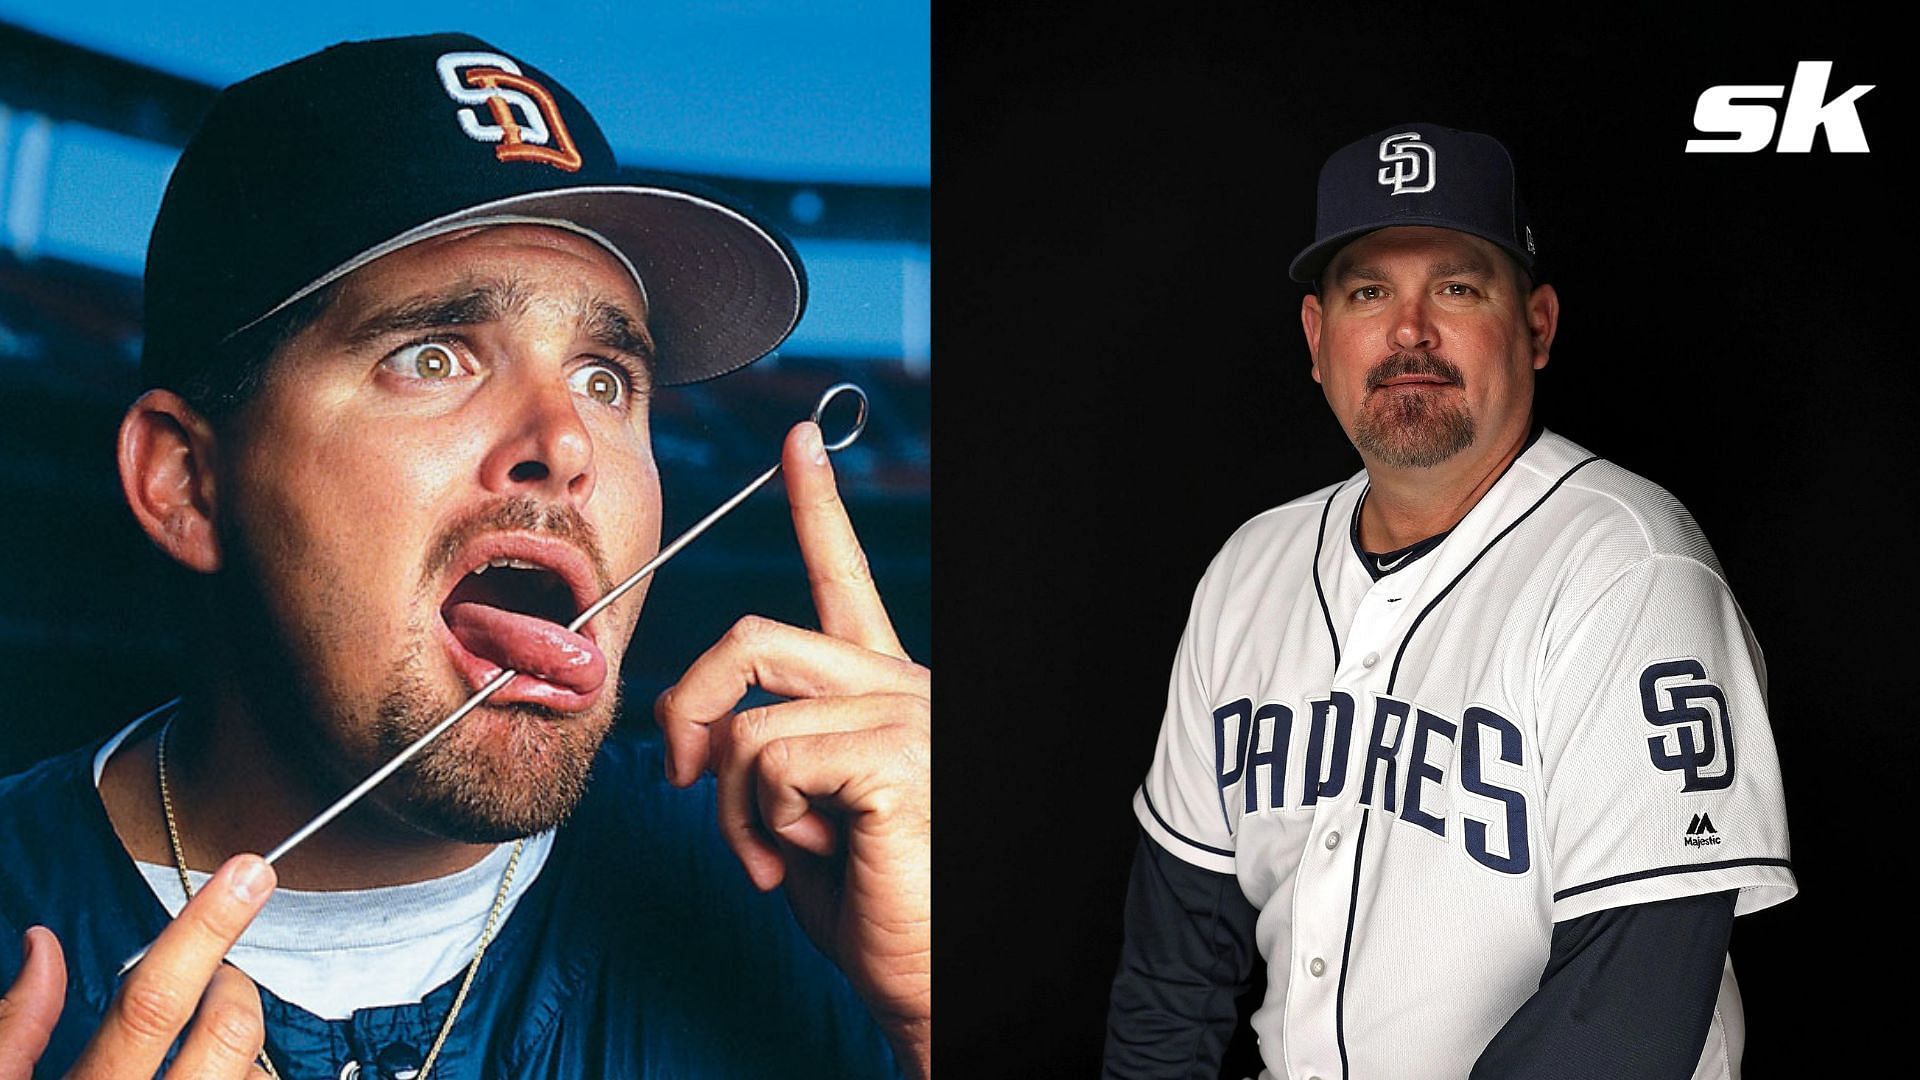 Doug Bochtler used to steal drinks from fans while with the San Diego Padres